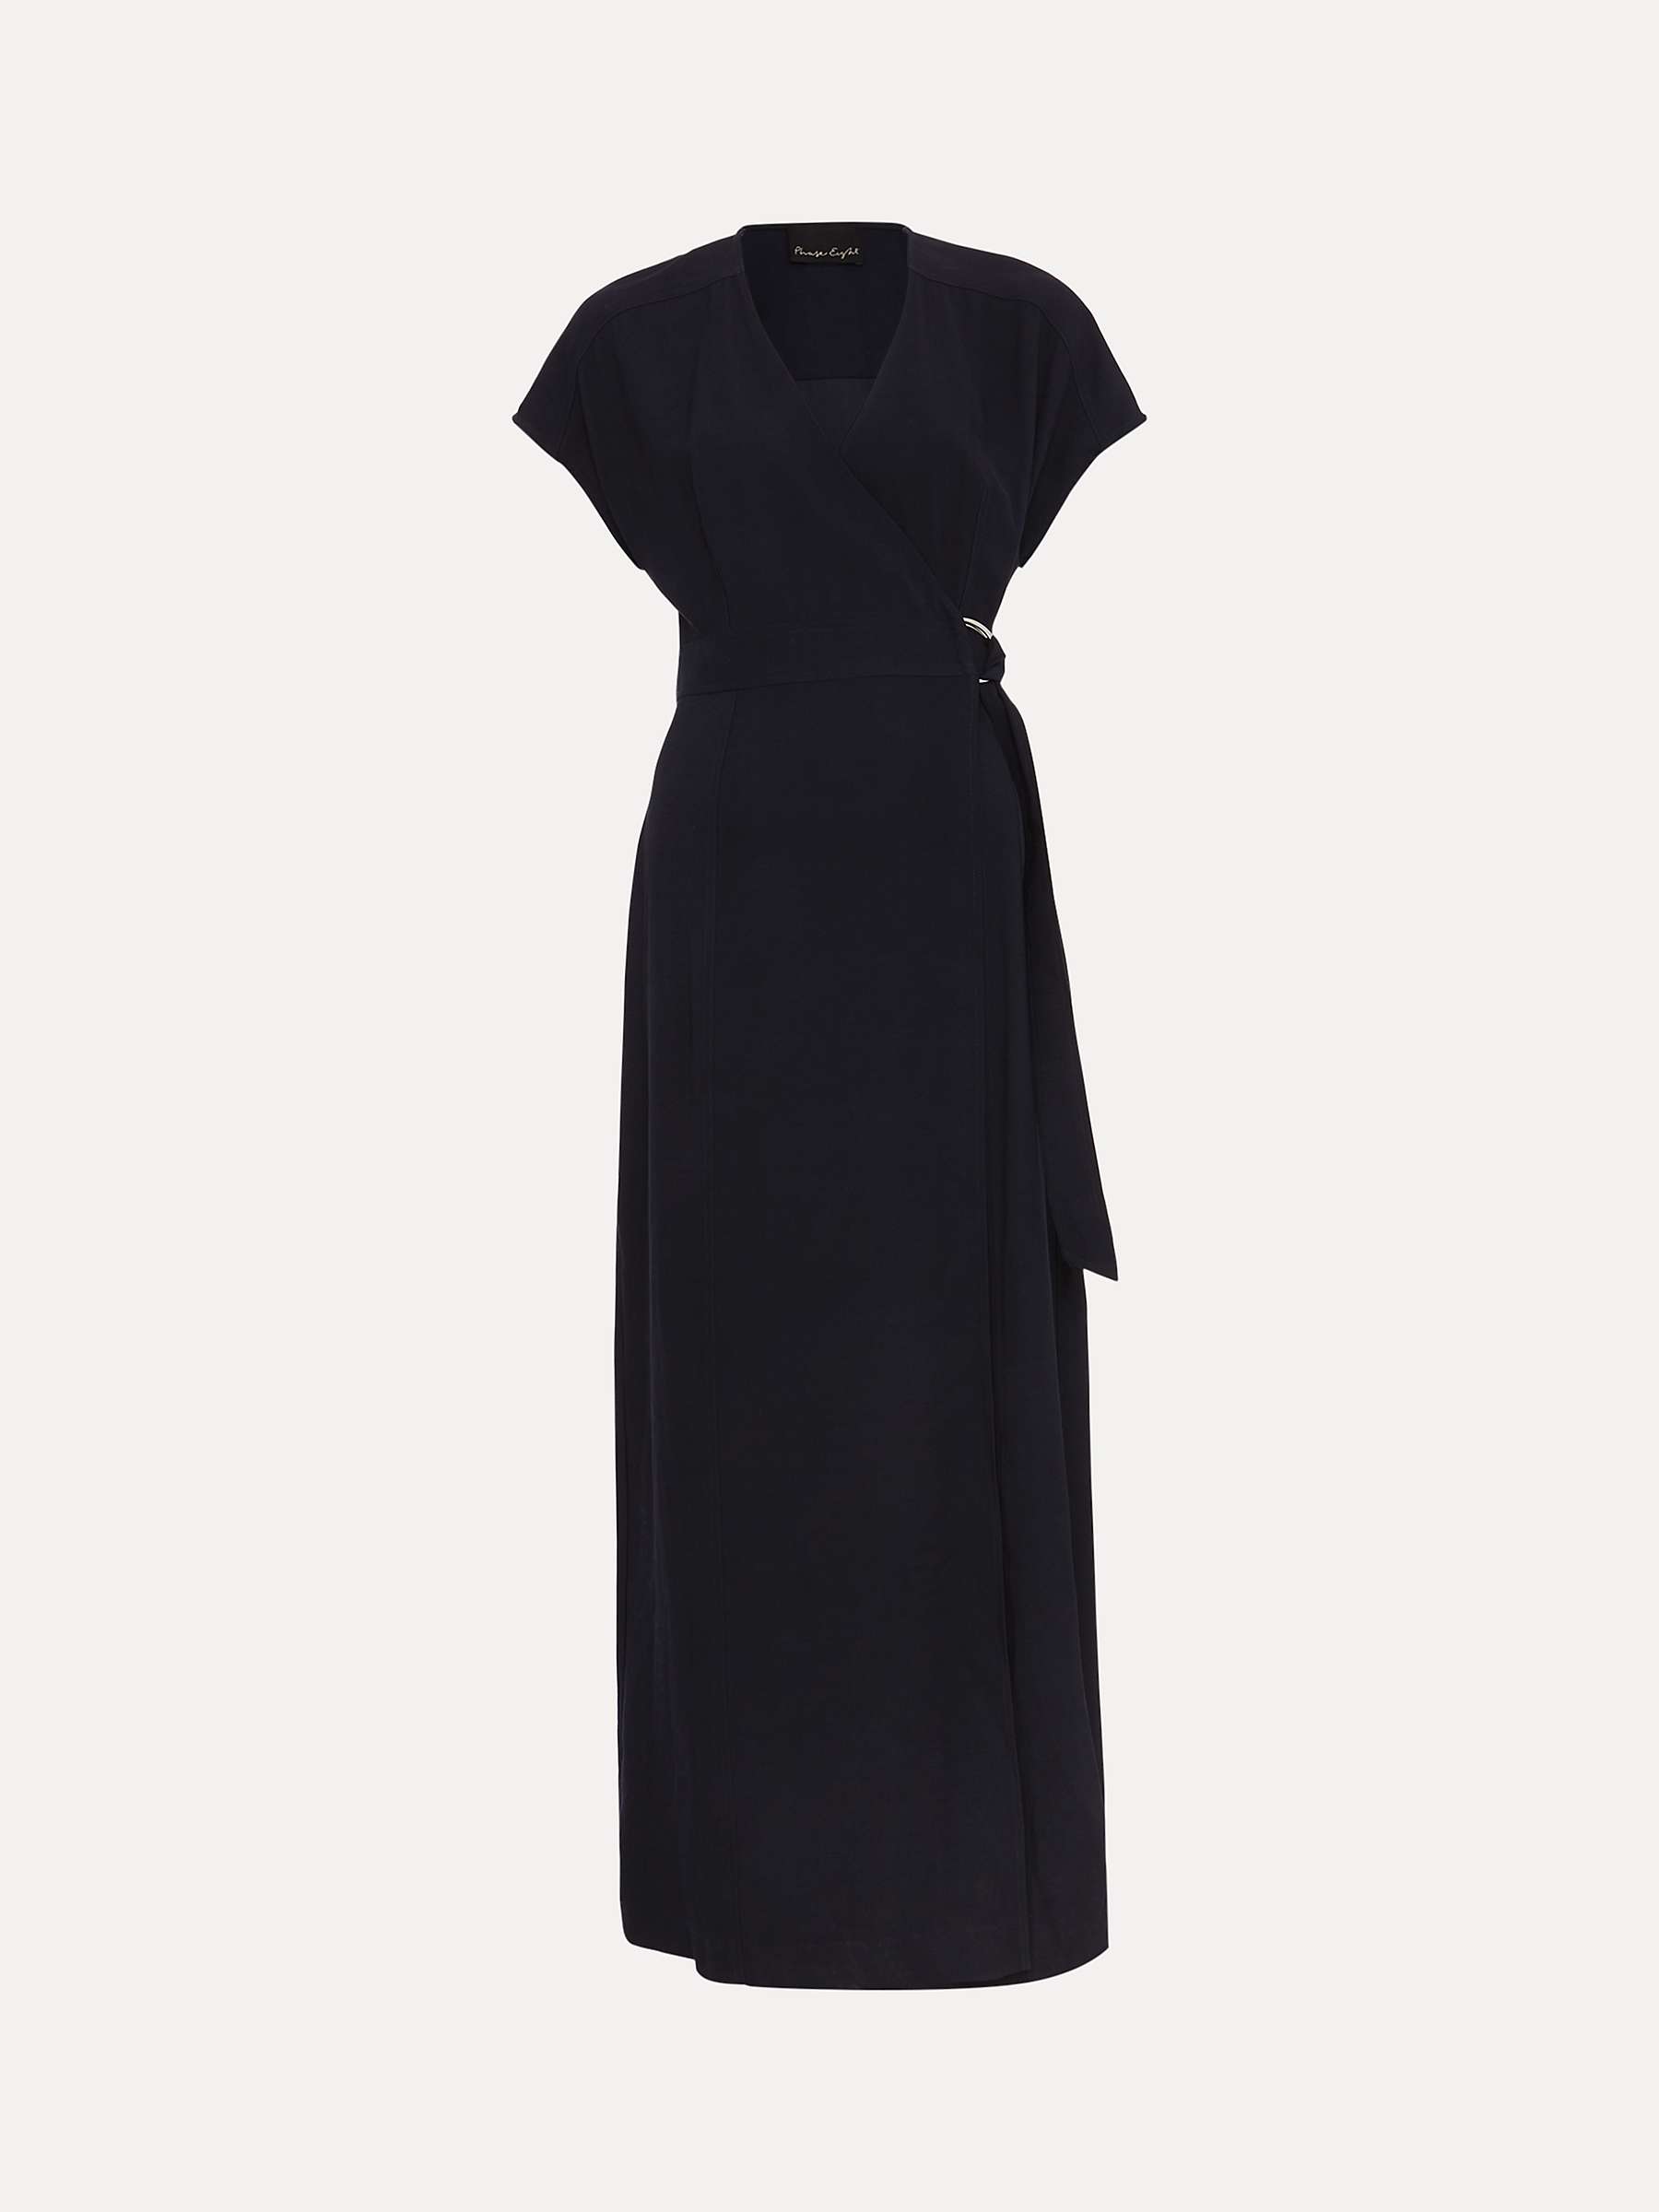 Buy Phase Eight Liv Ecovero Wrap Maxi Dress, Navy Online at johnlewis.com